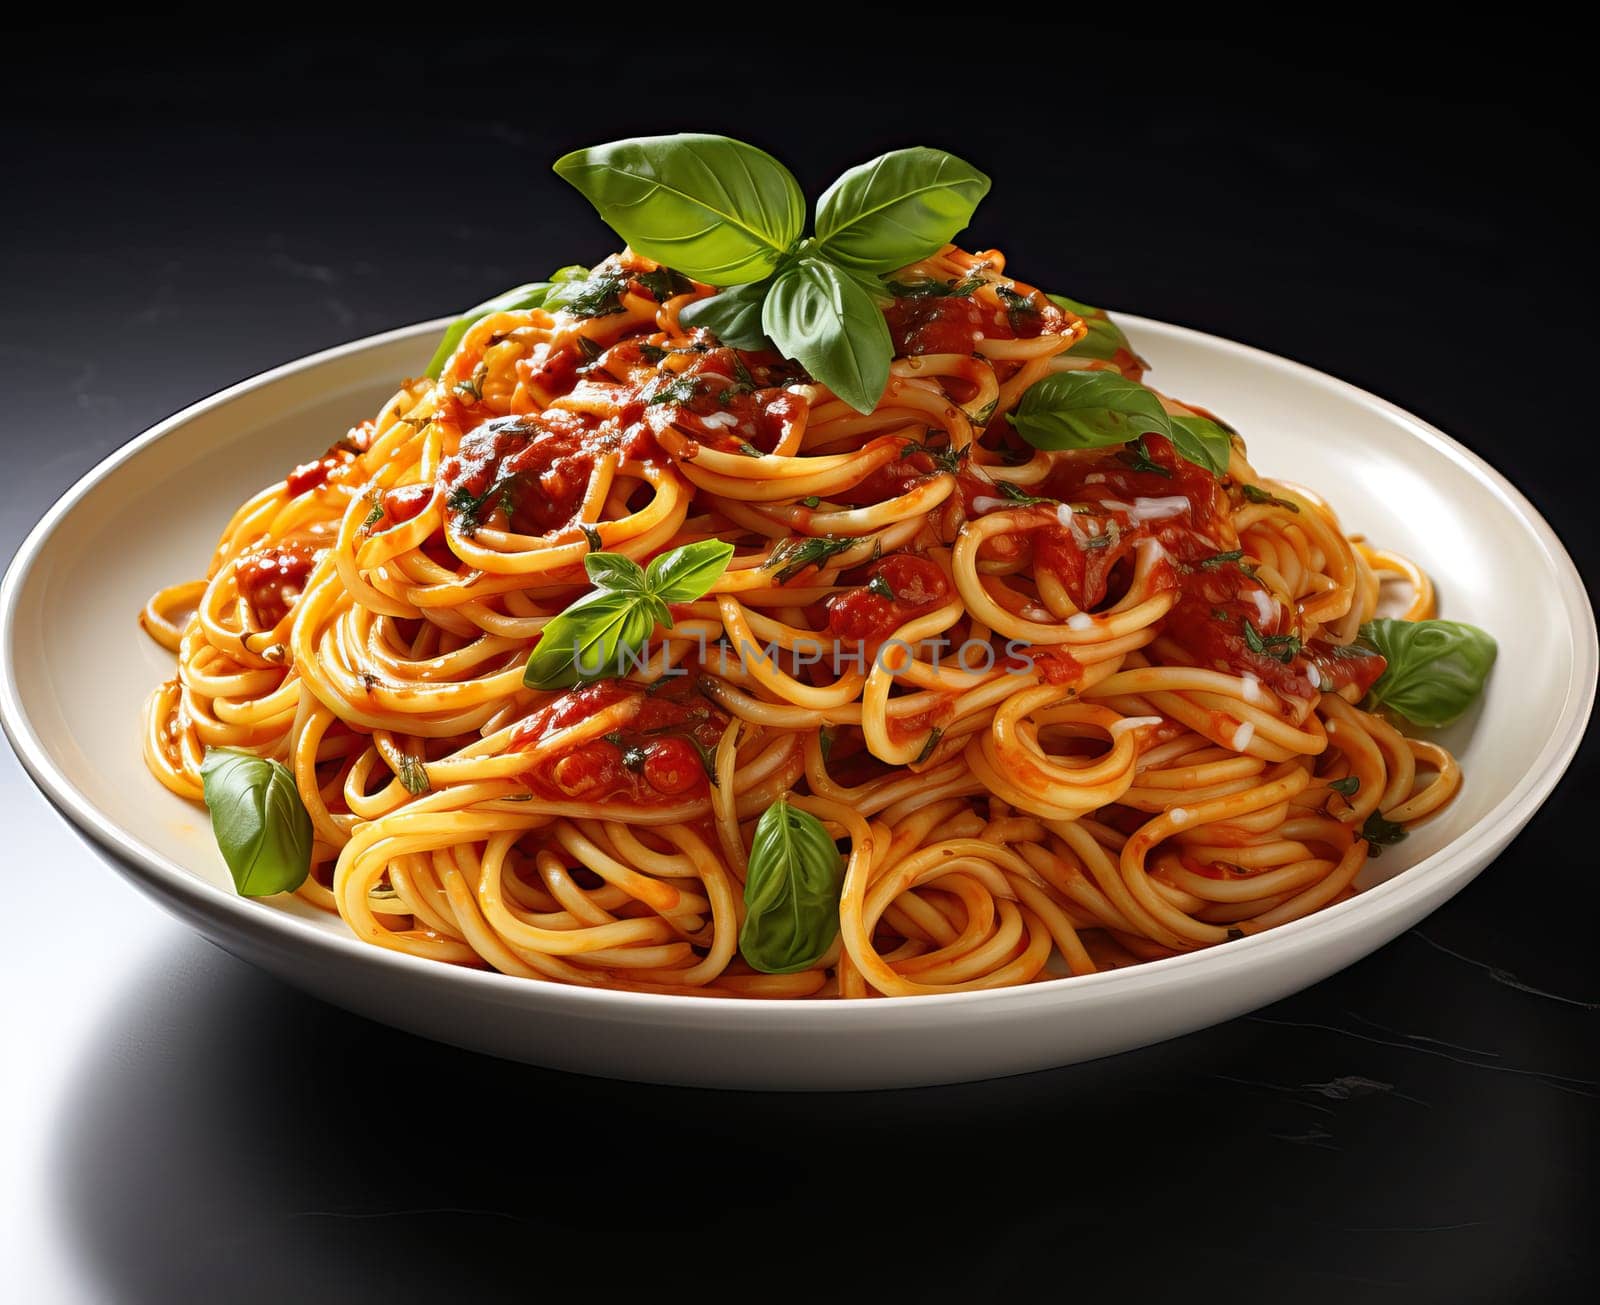 Plate of spaghetti with sauce on a dark background. by Fischeron